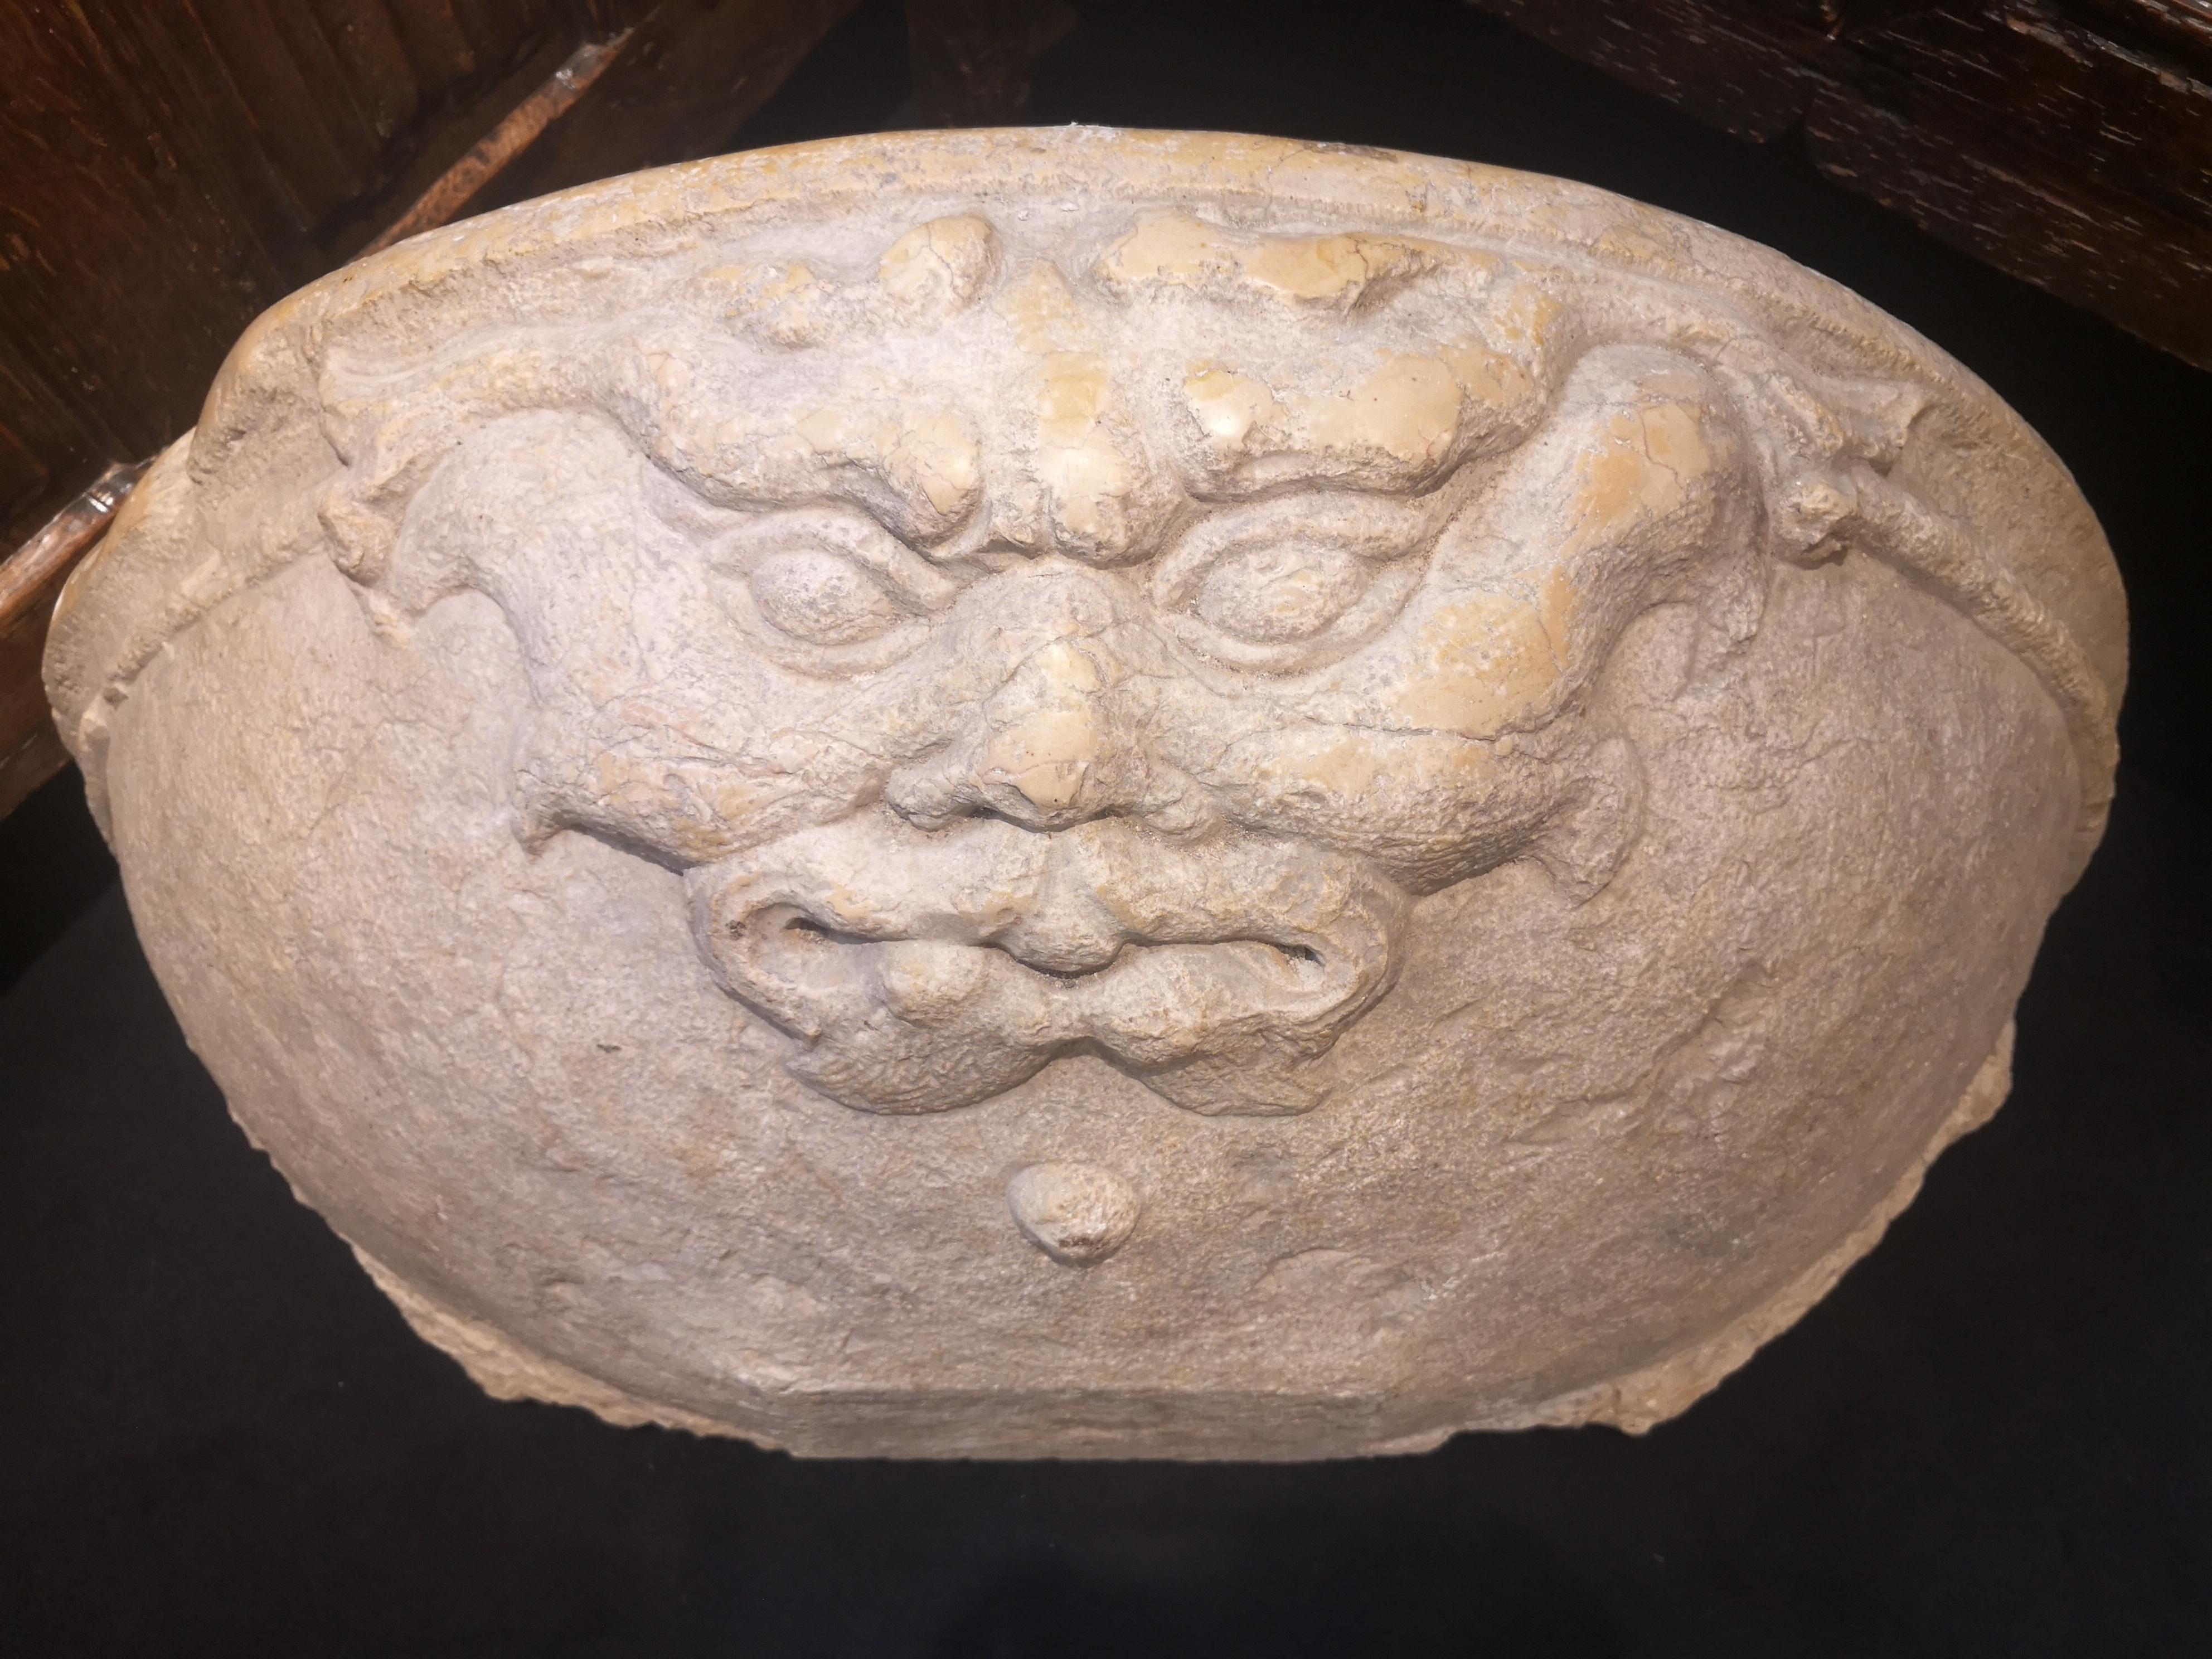 HALF-MOON STOUP

ORIGIN: VENICE, ITALY

PERIOD: 13th Century

Height: 33 cm
Width: 82 cm
Depth: 55 cm

Nembro marble 

This hemispherical stoup is powerfully carved with a mascaron with strong features, frowning eyebrows, a strong nose and grimacing